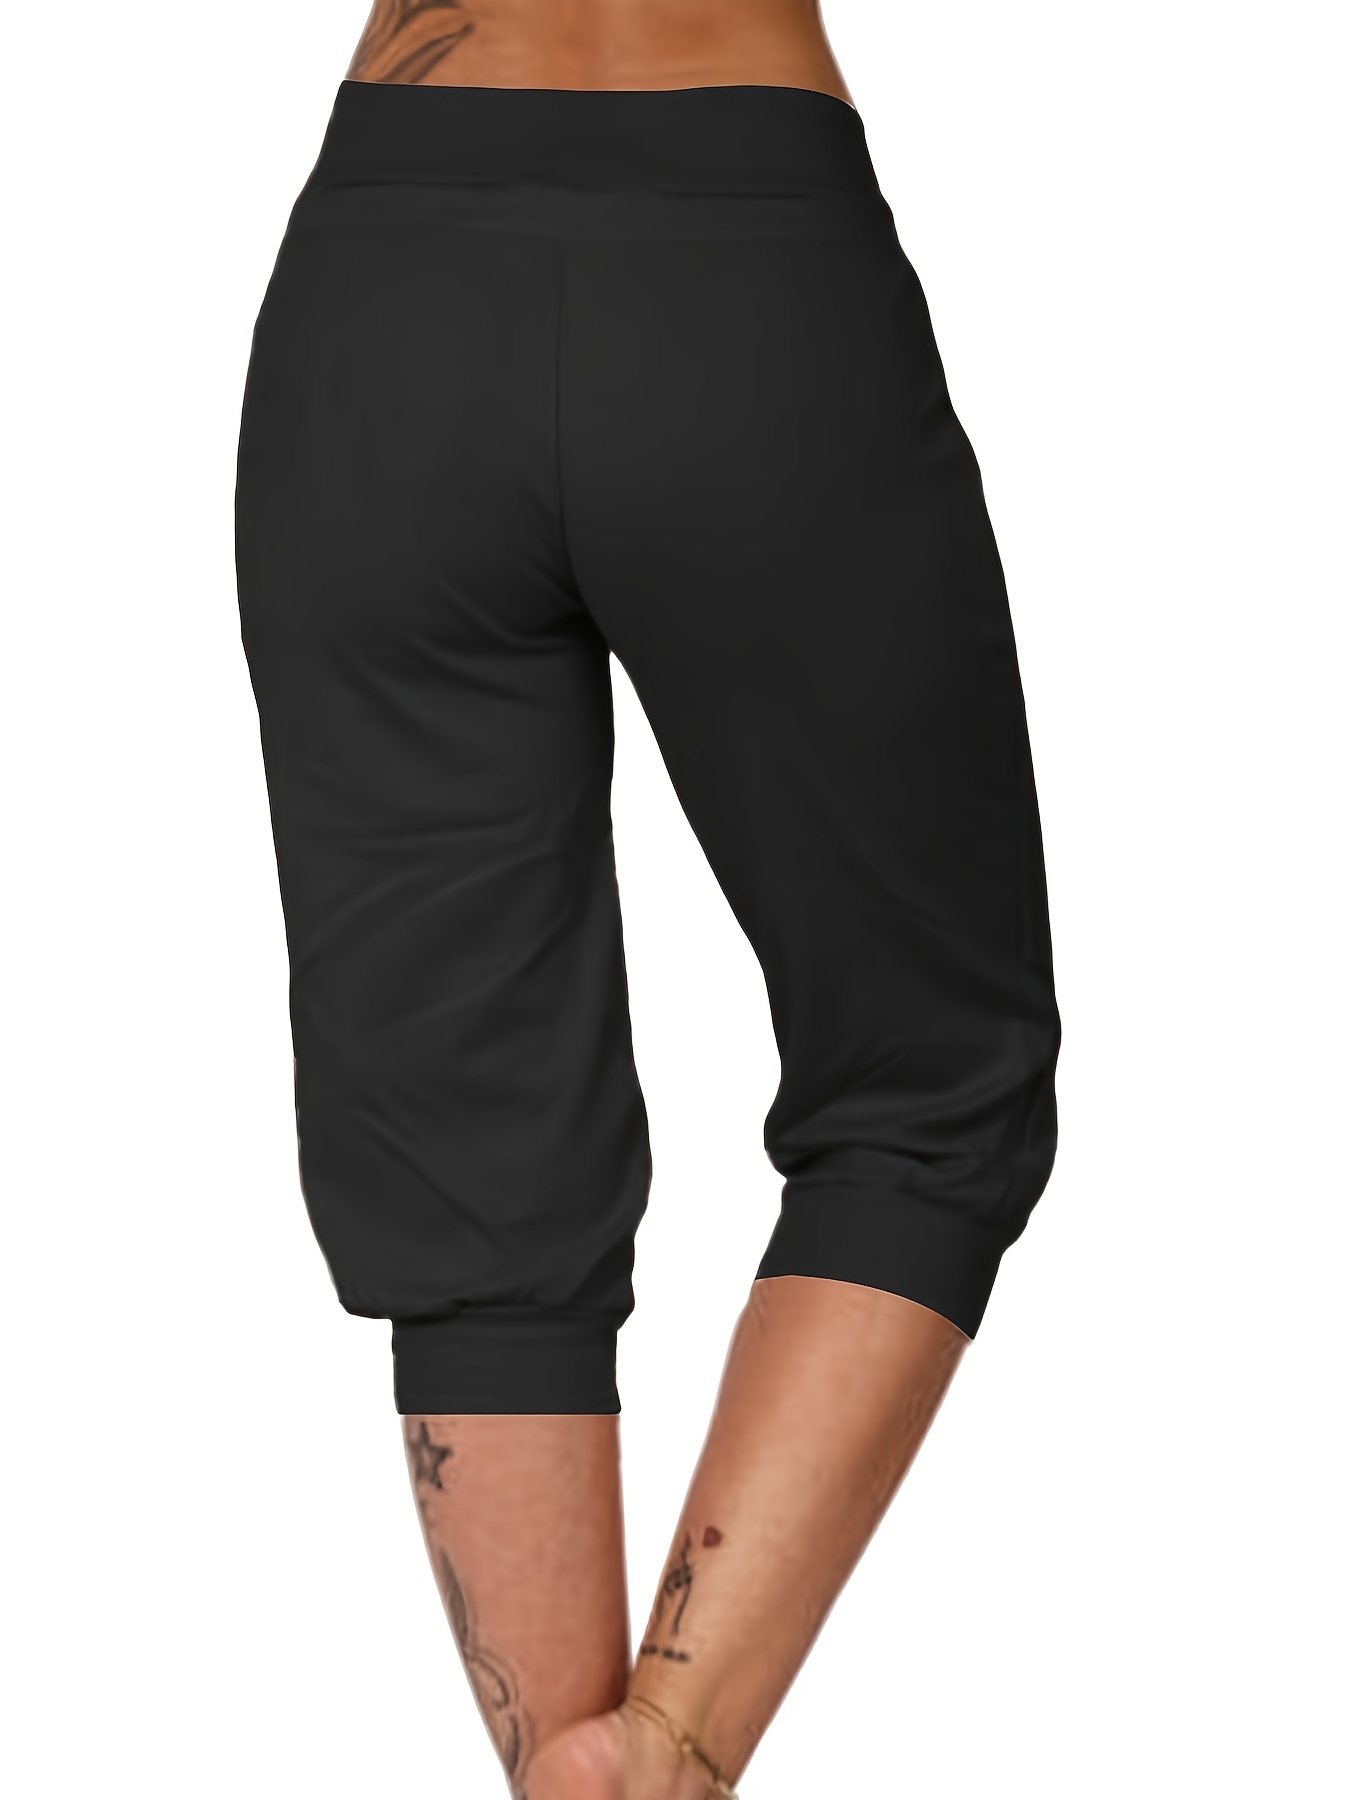 Solada Stretch capri pants: for sale at 9.99€ on